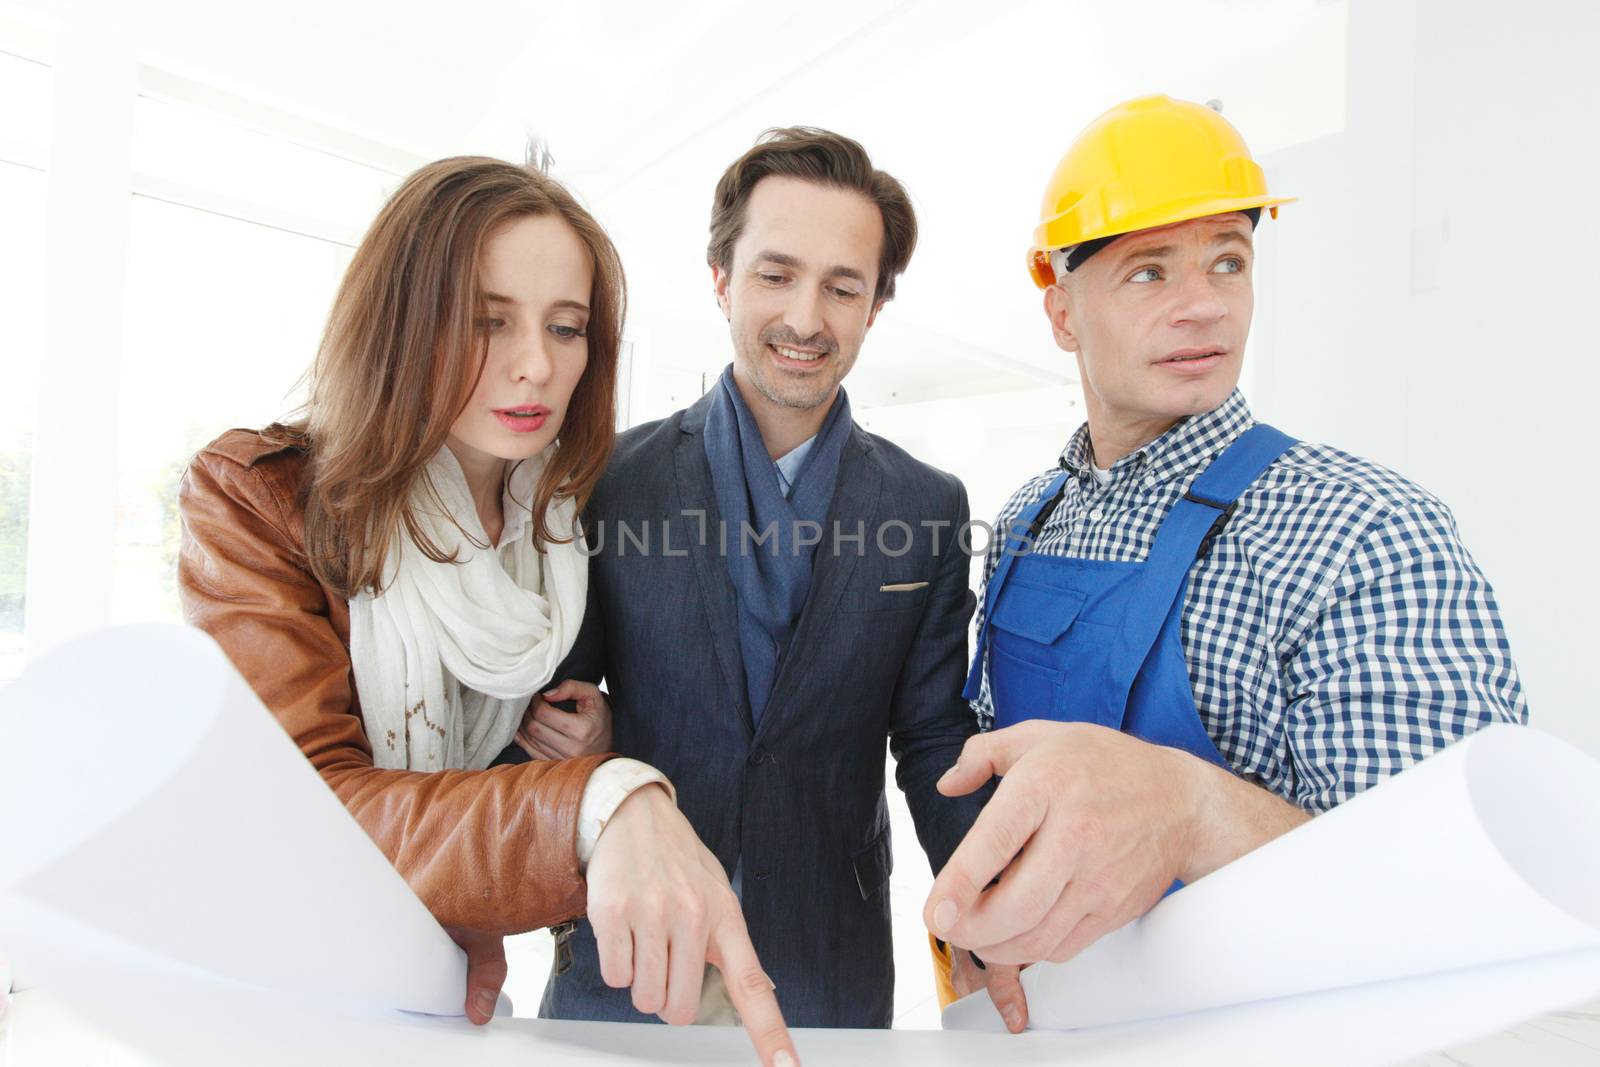 Worker shows house design plans to a young couple at construction site